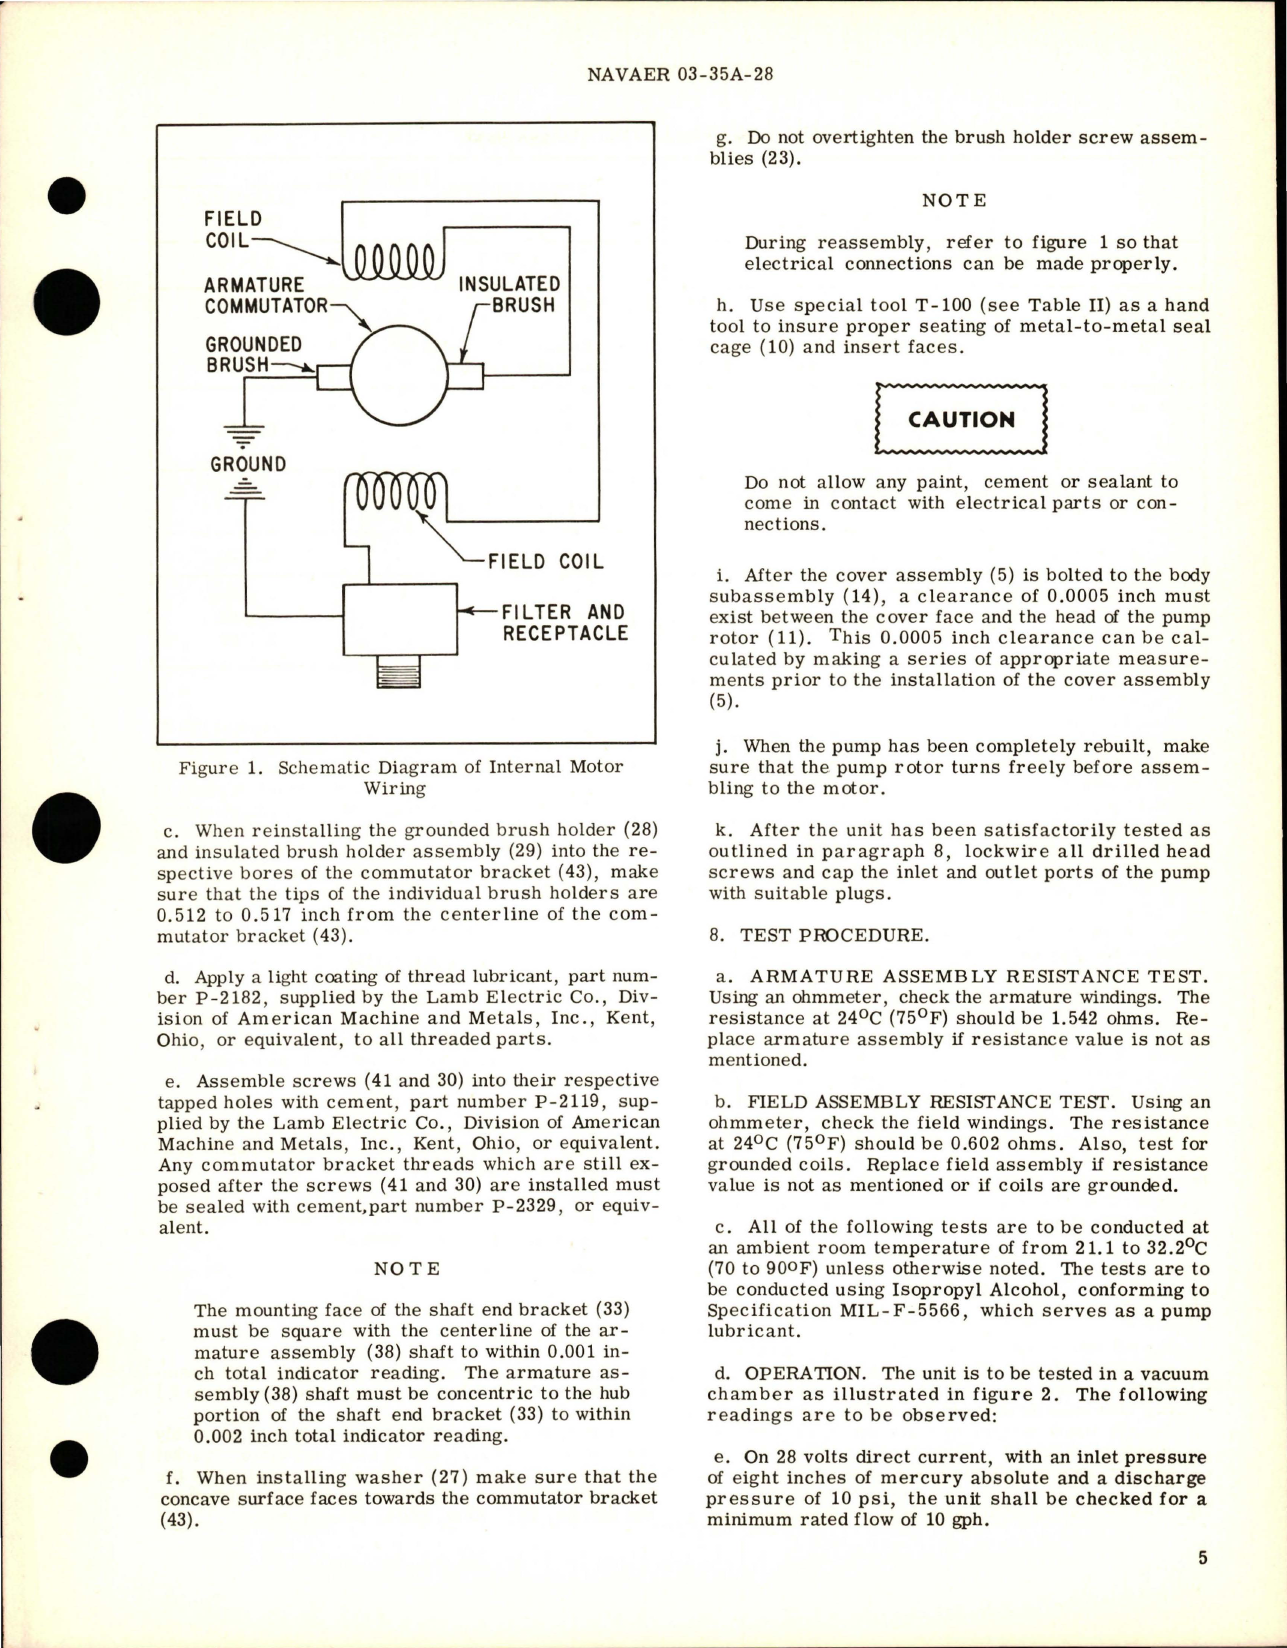 Sample page 7 from AirCorps Library document: Overhaul Instructions with Parts Breakdown for Anti-Icing Pump - Model 3013-A